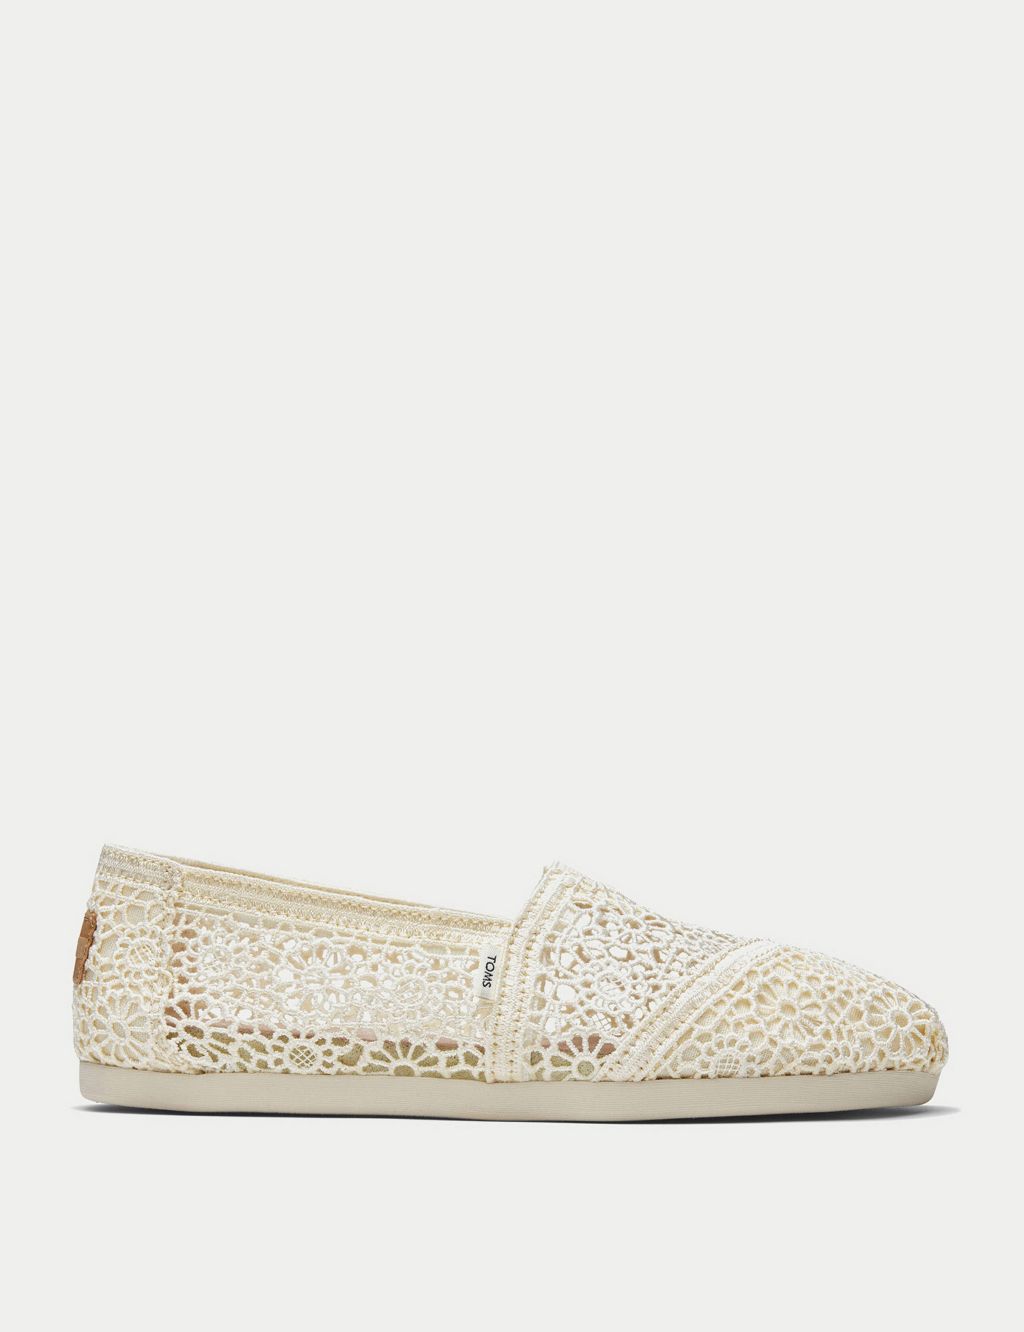 Canvas Embroidered Espadrilles image 1